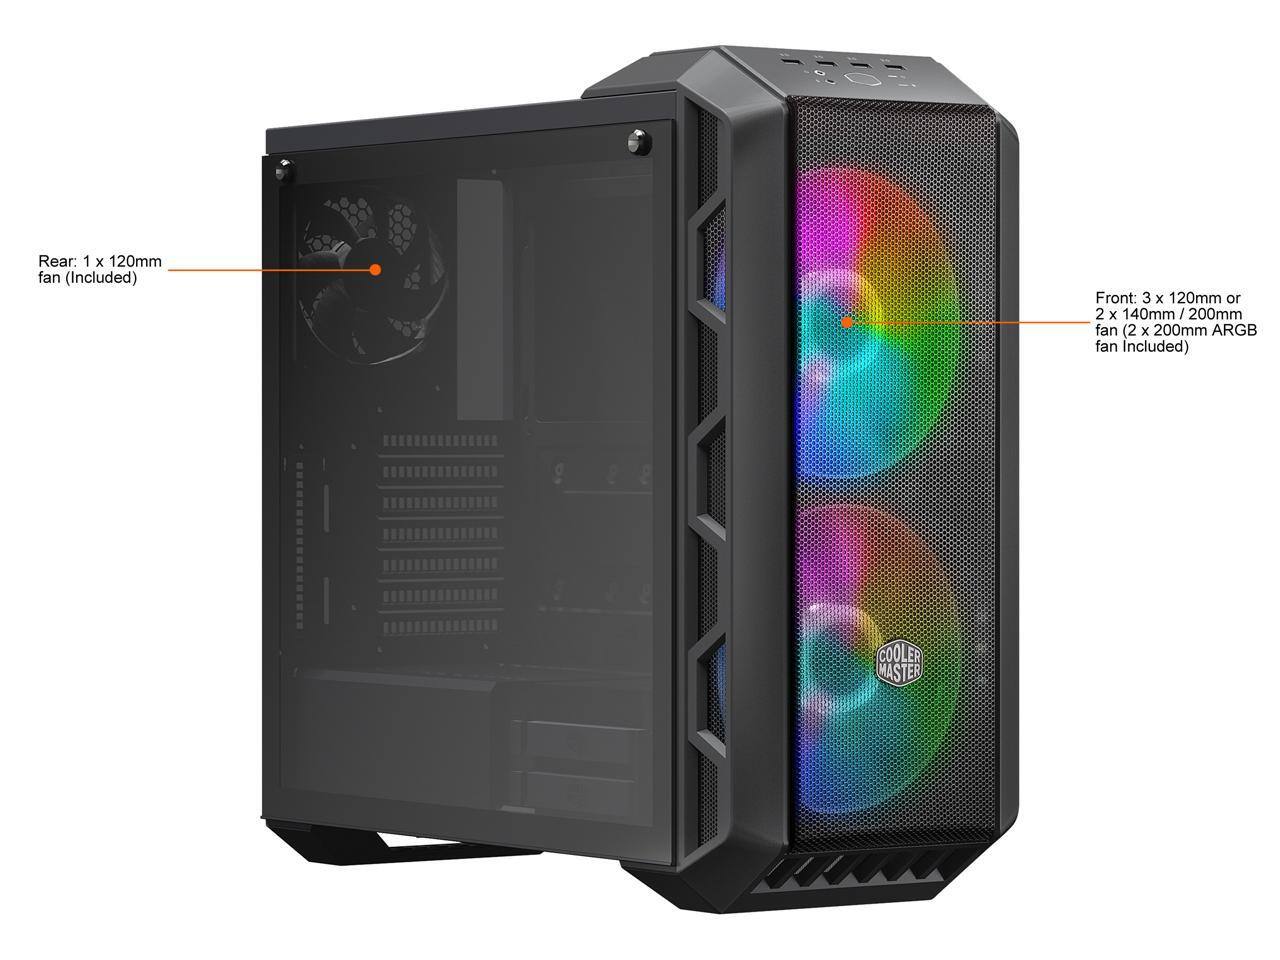 Cooler Master MasterCase H500 ARGB ATX Mid Tower Case $94.99 with code